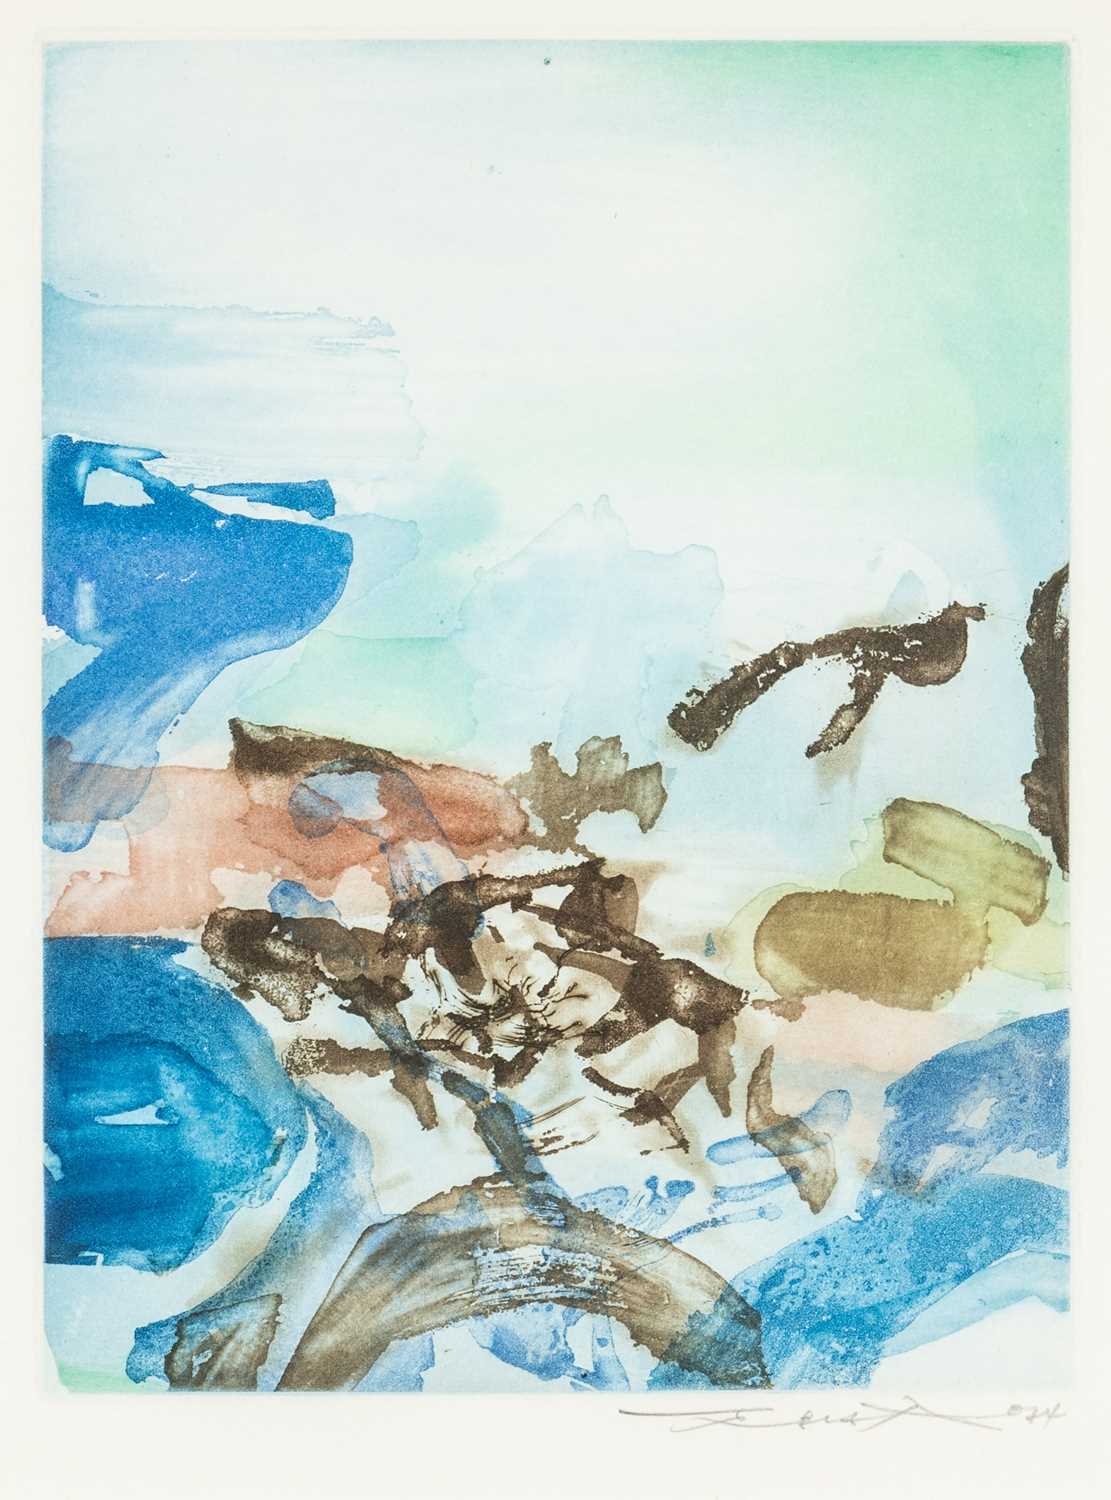 ‡ ZAO WOU-KI 趙無極 (Chinese-French, 1920-2013) etching with aquatint - Composition I from